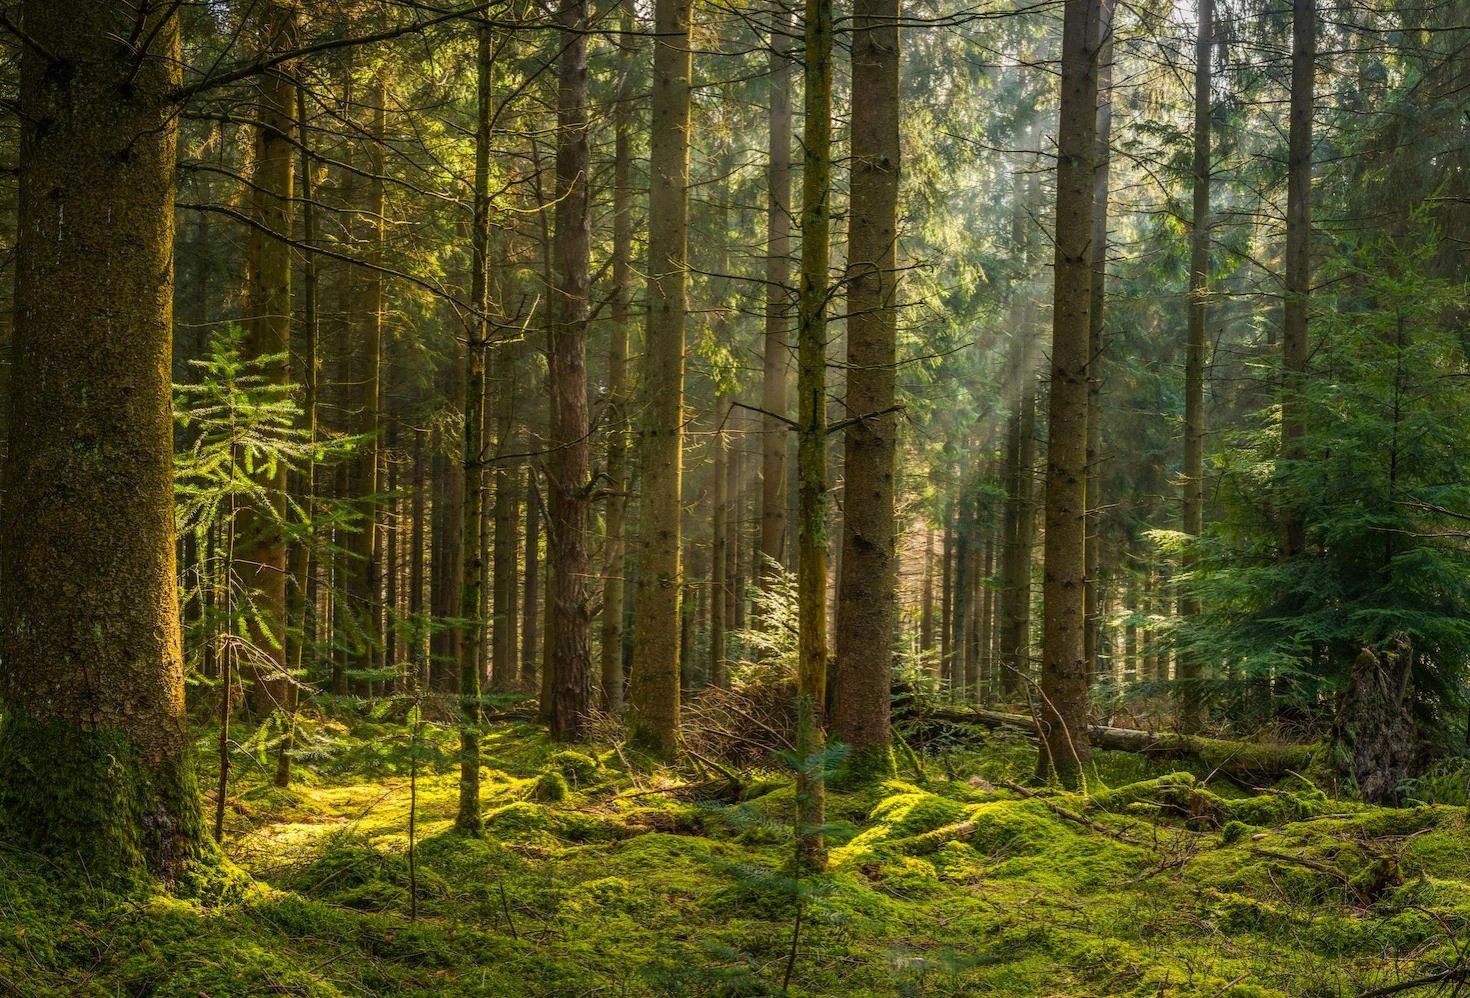 A Walk in the Woods May Boost Mental Health (Source: Harvard Medicine)